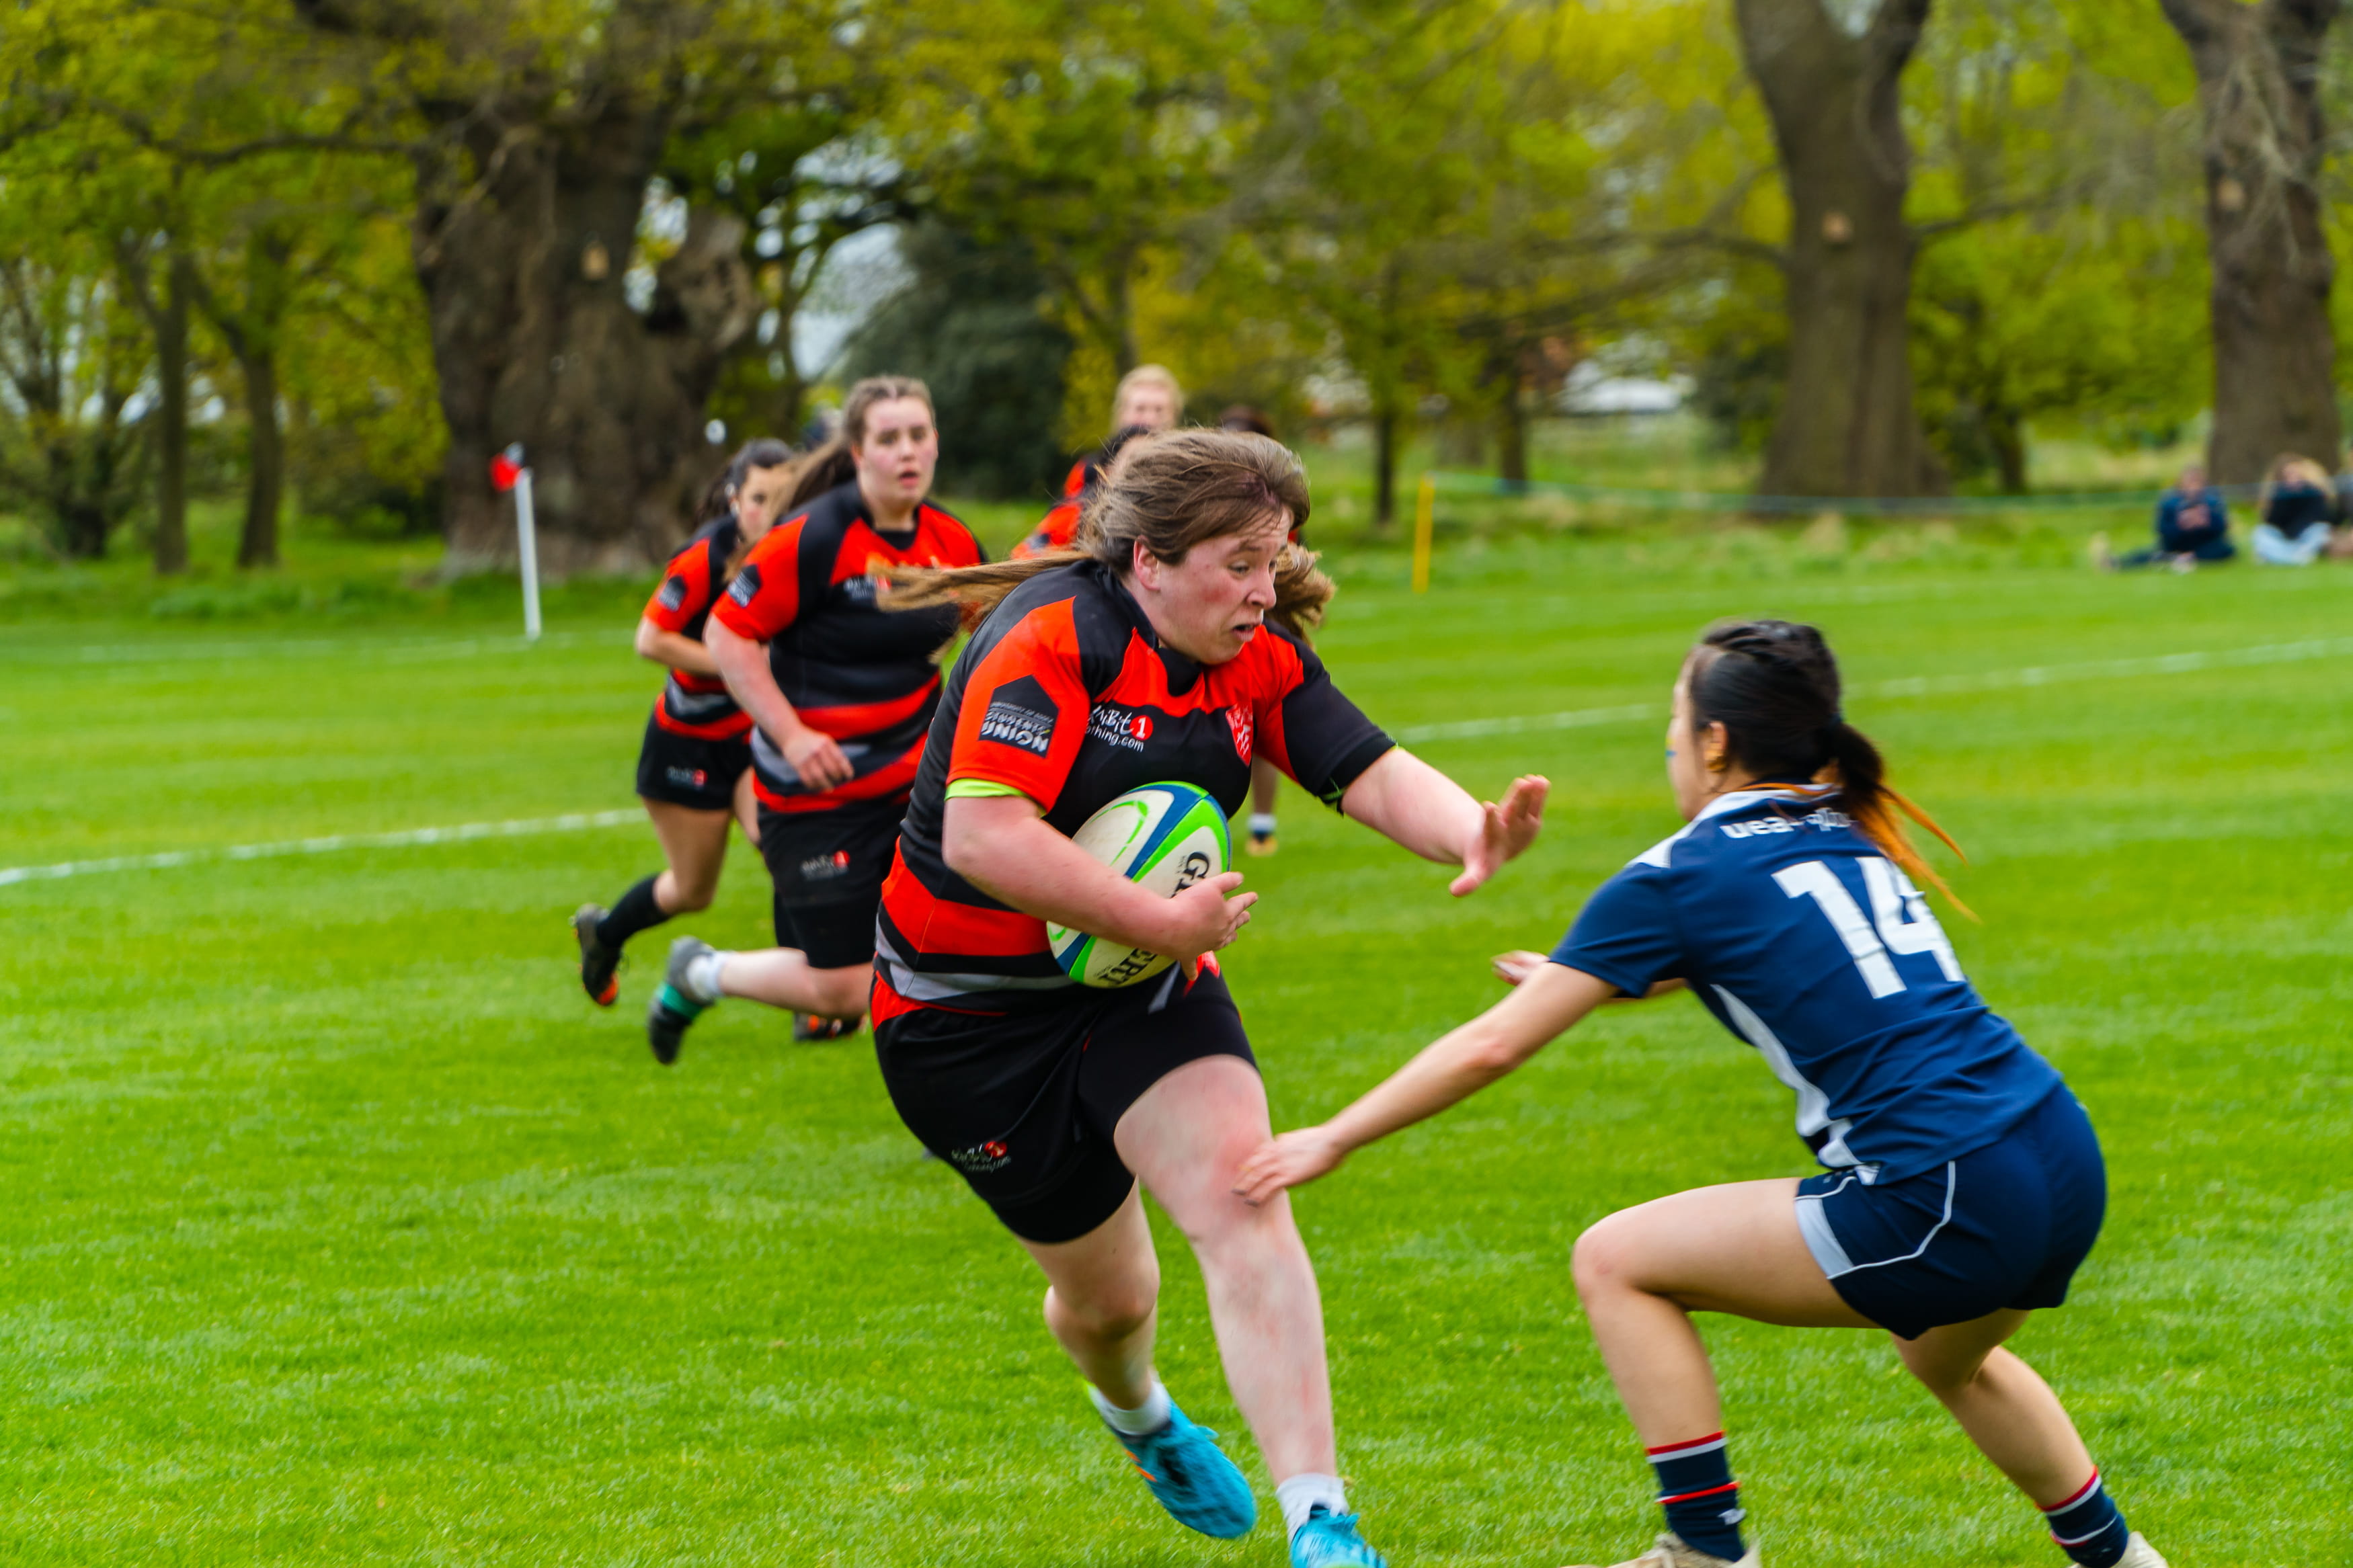 University of Essex Women's Rugby Team against University of East Anglia on Derby Day